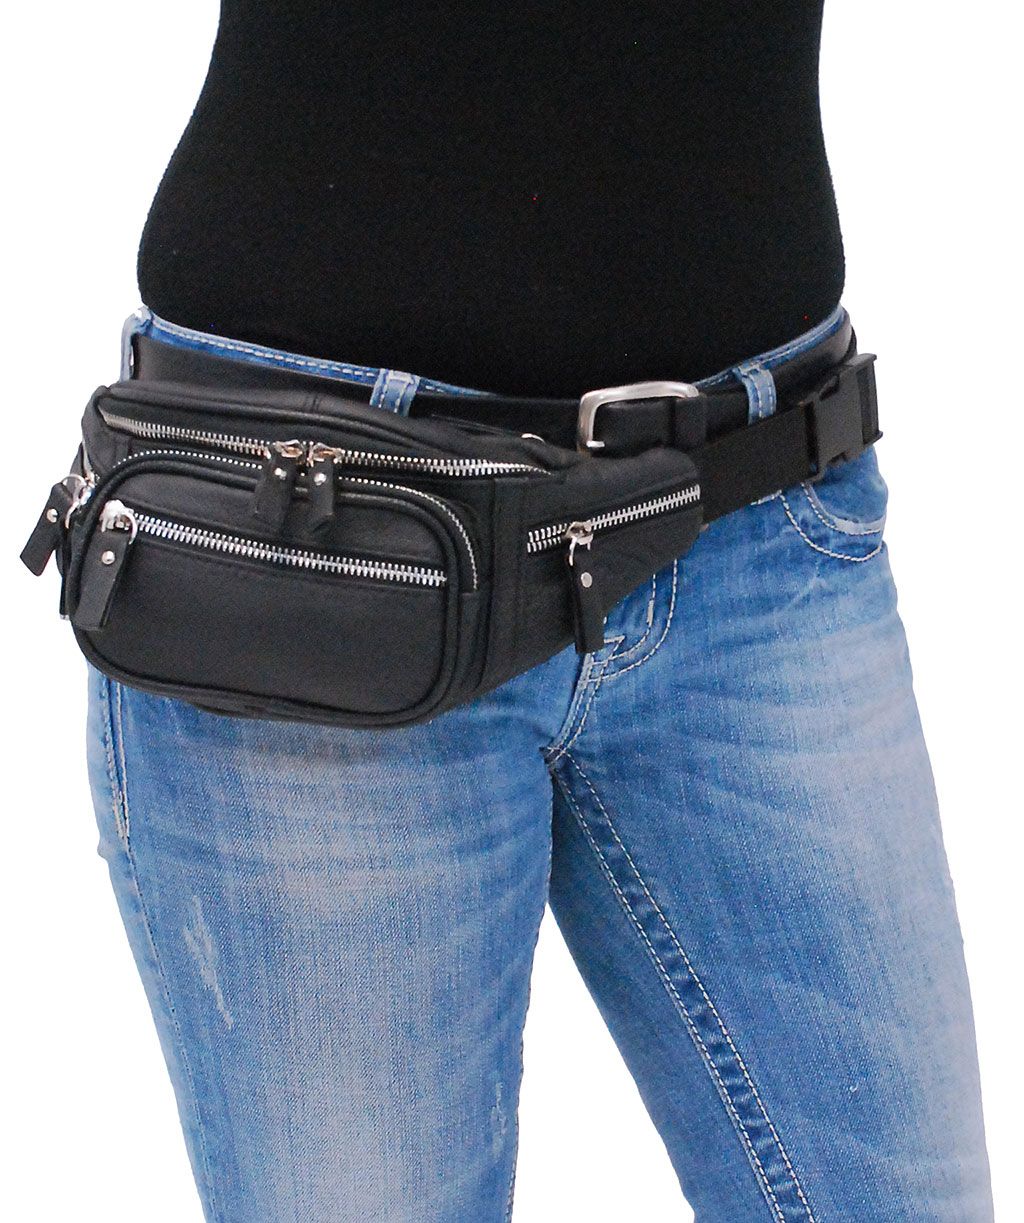 lady rider wearing a black leather fanny pack